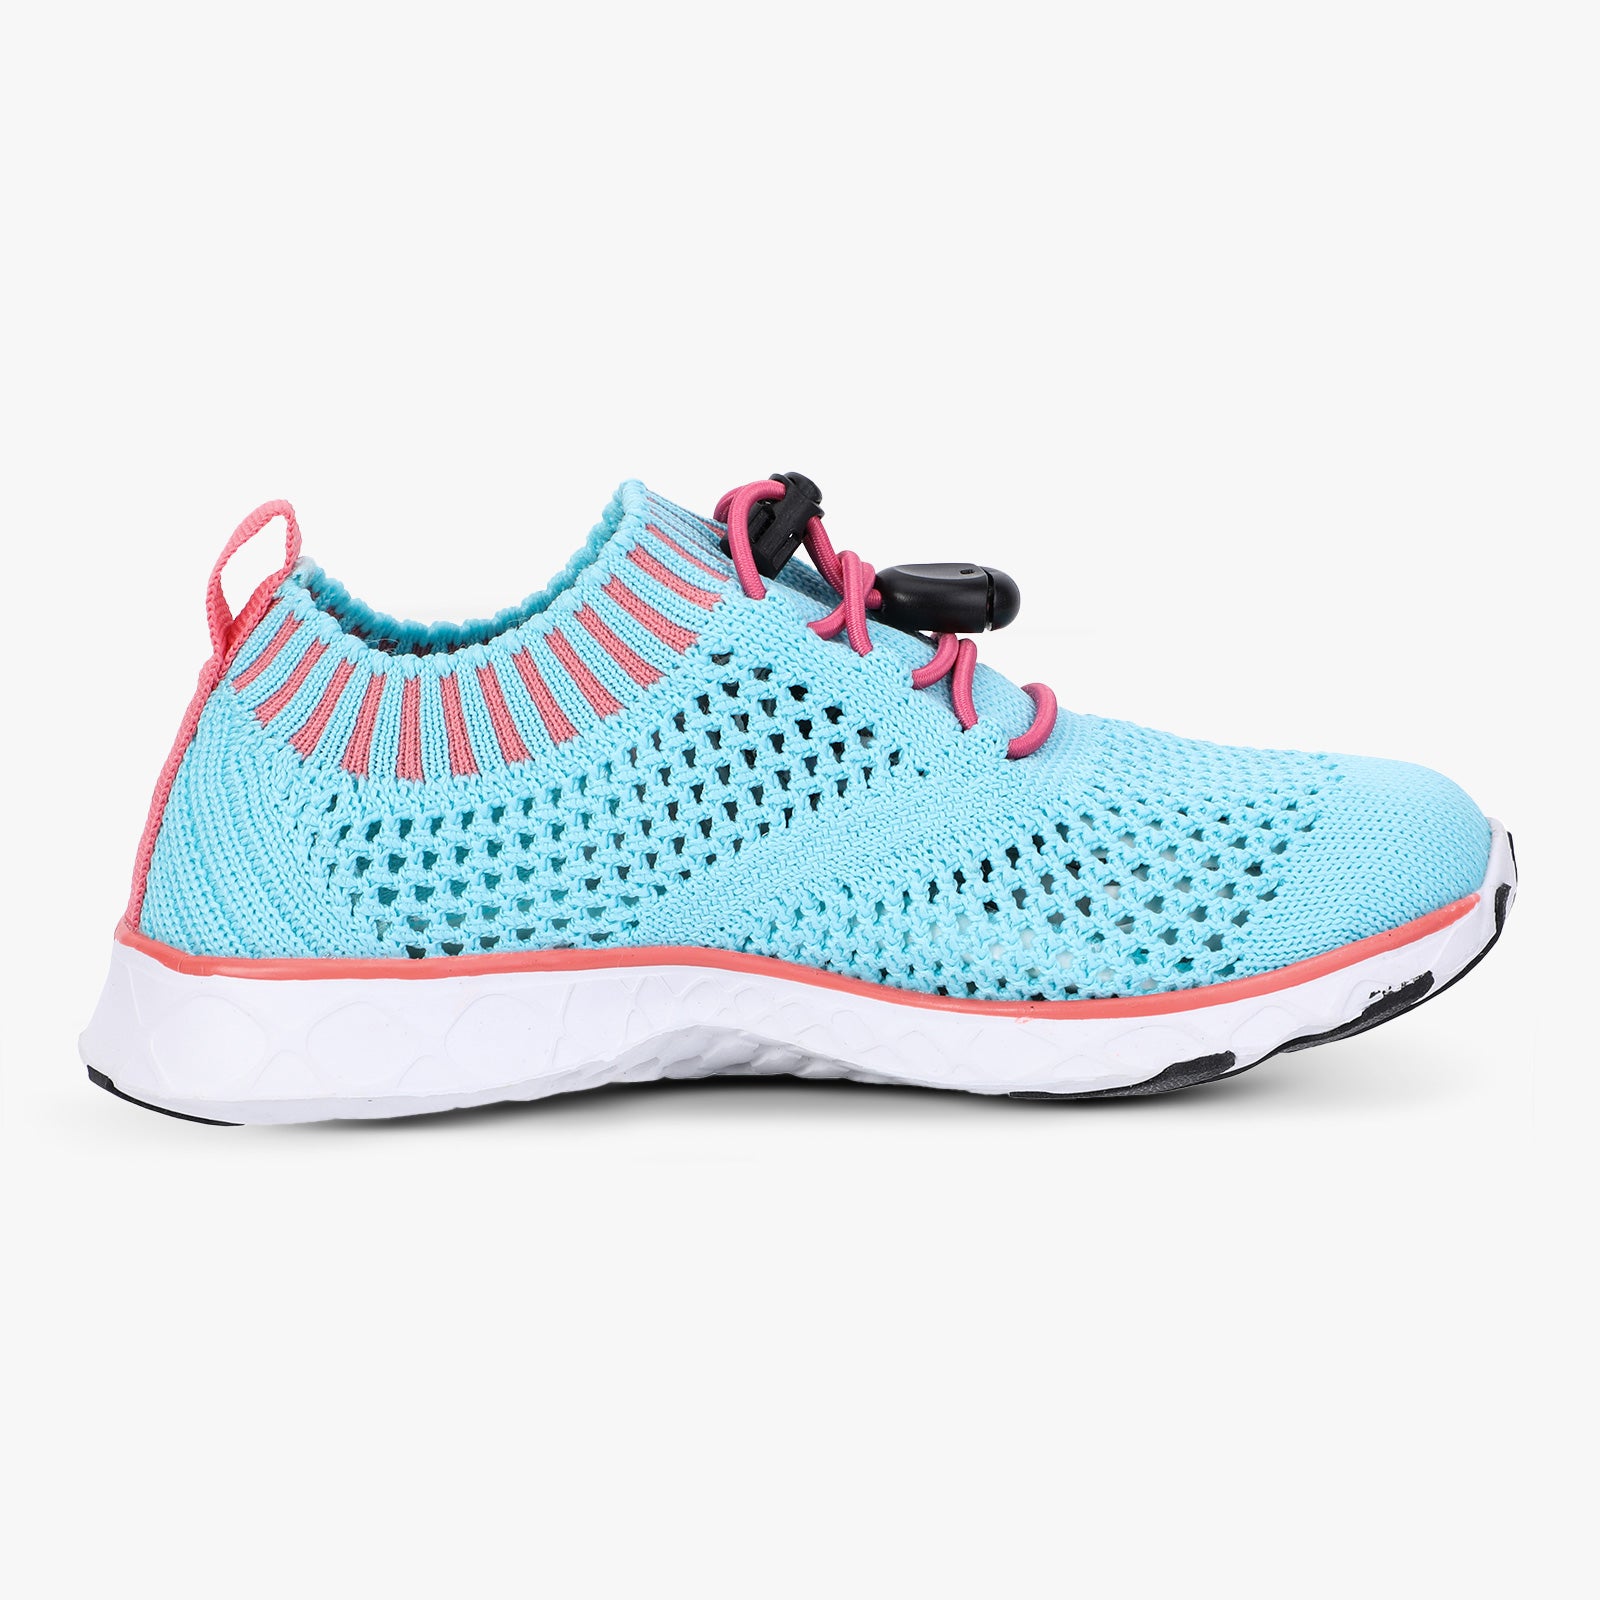 Kid's Xdrain Classic Knit Water Shoes